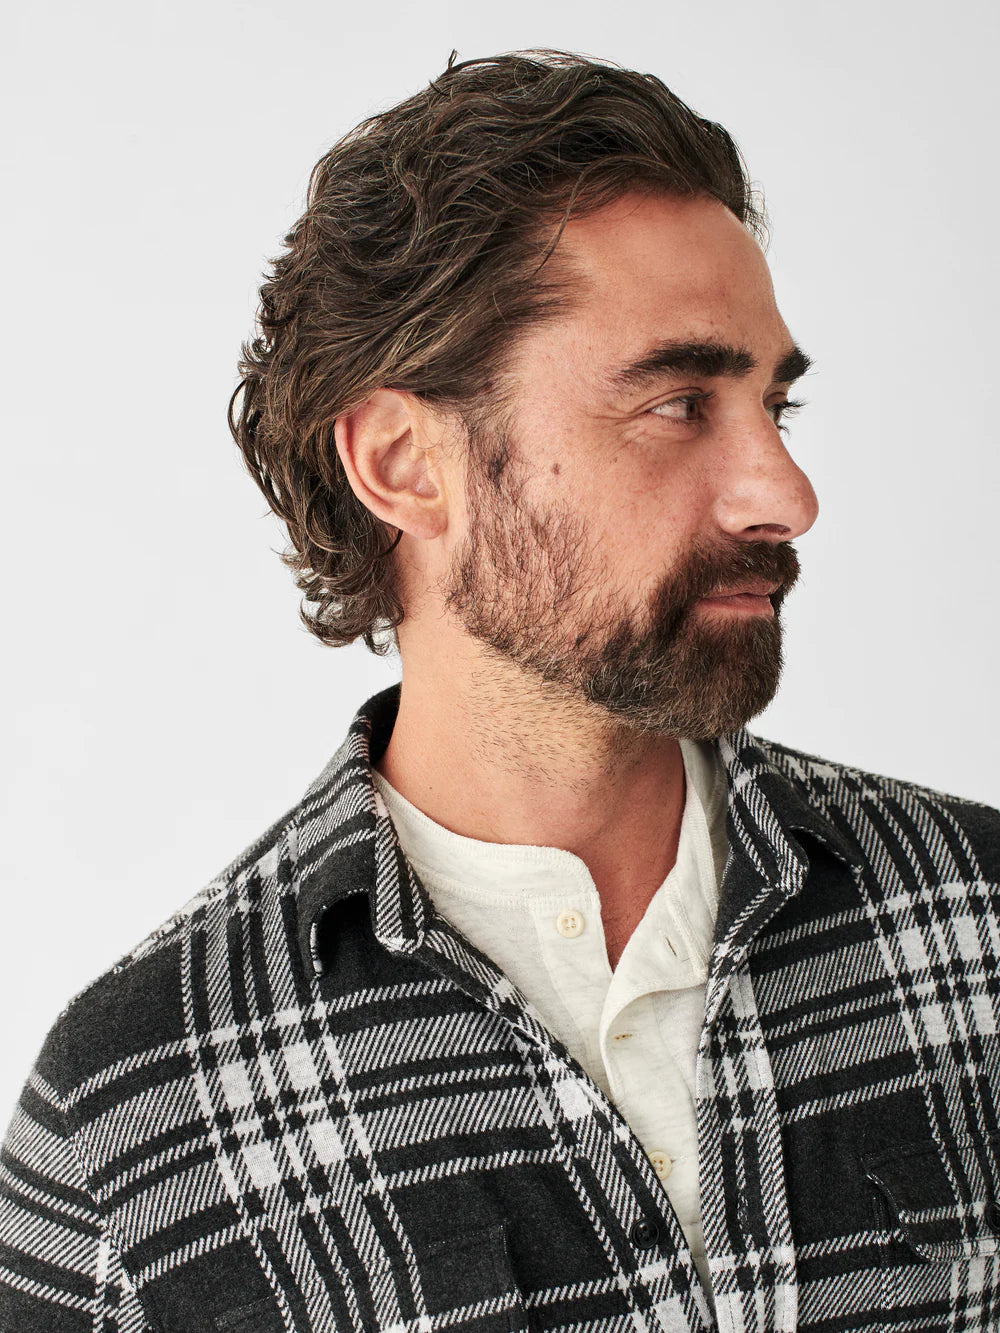 FAHERTY SWEATER SHIRT IN CHARCOAL BONE PLAID